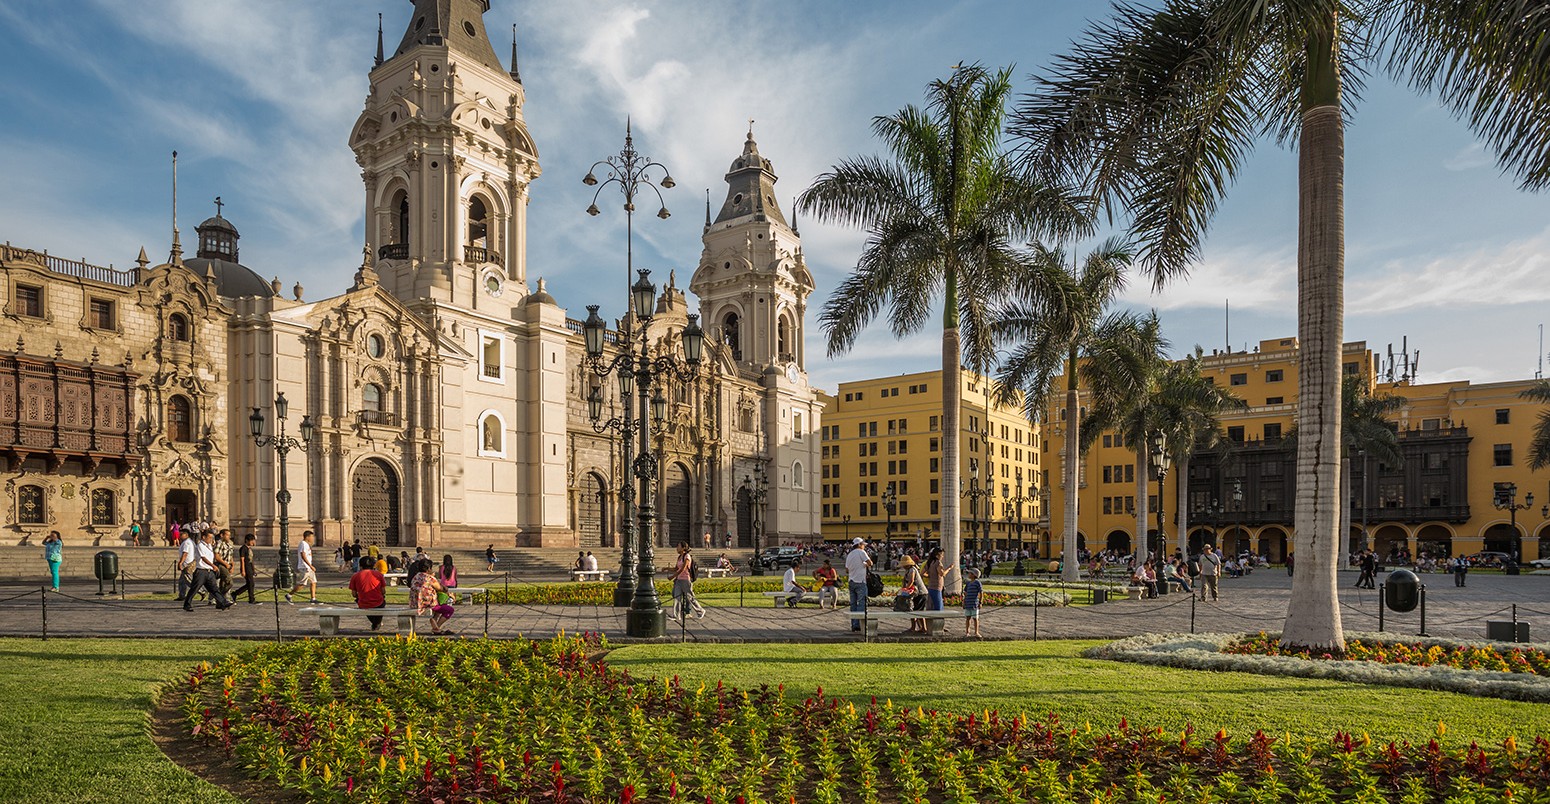 View of the cathedral church and the main square in downtown Lima, Peru.